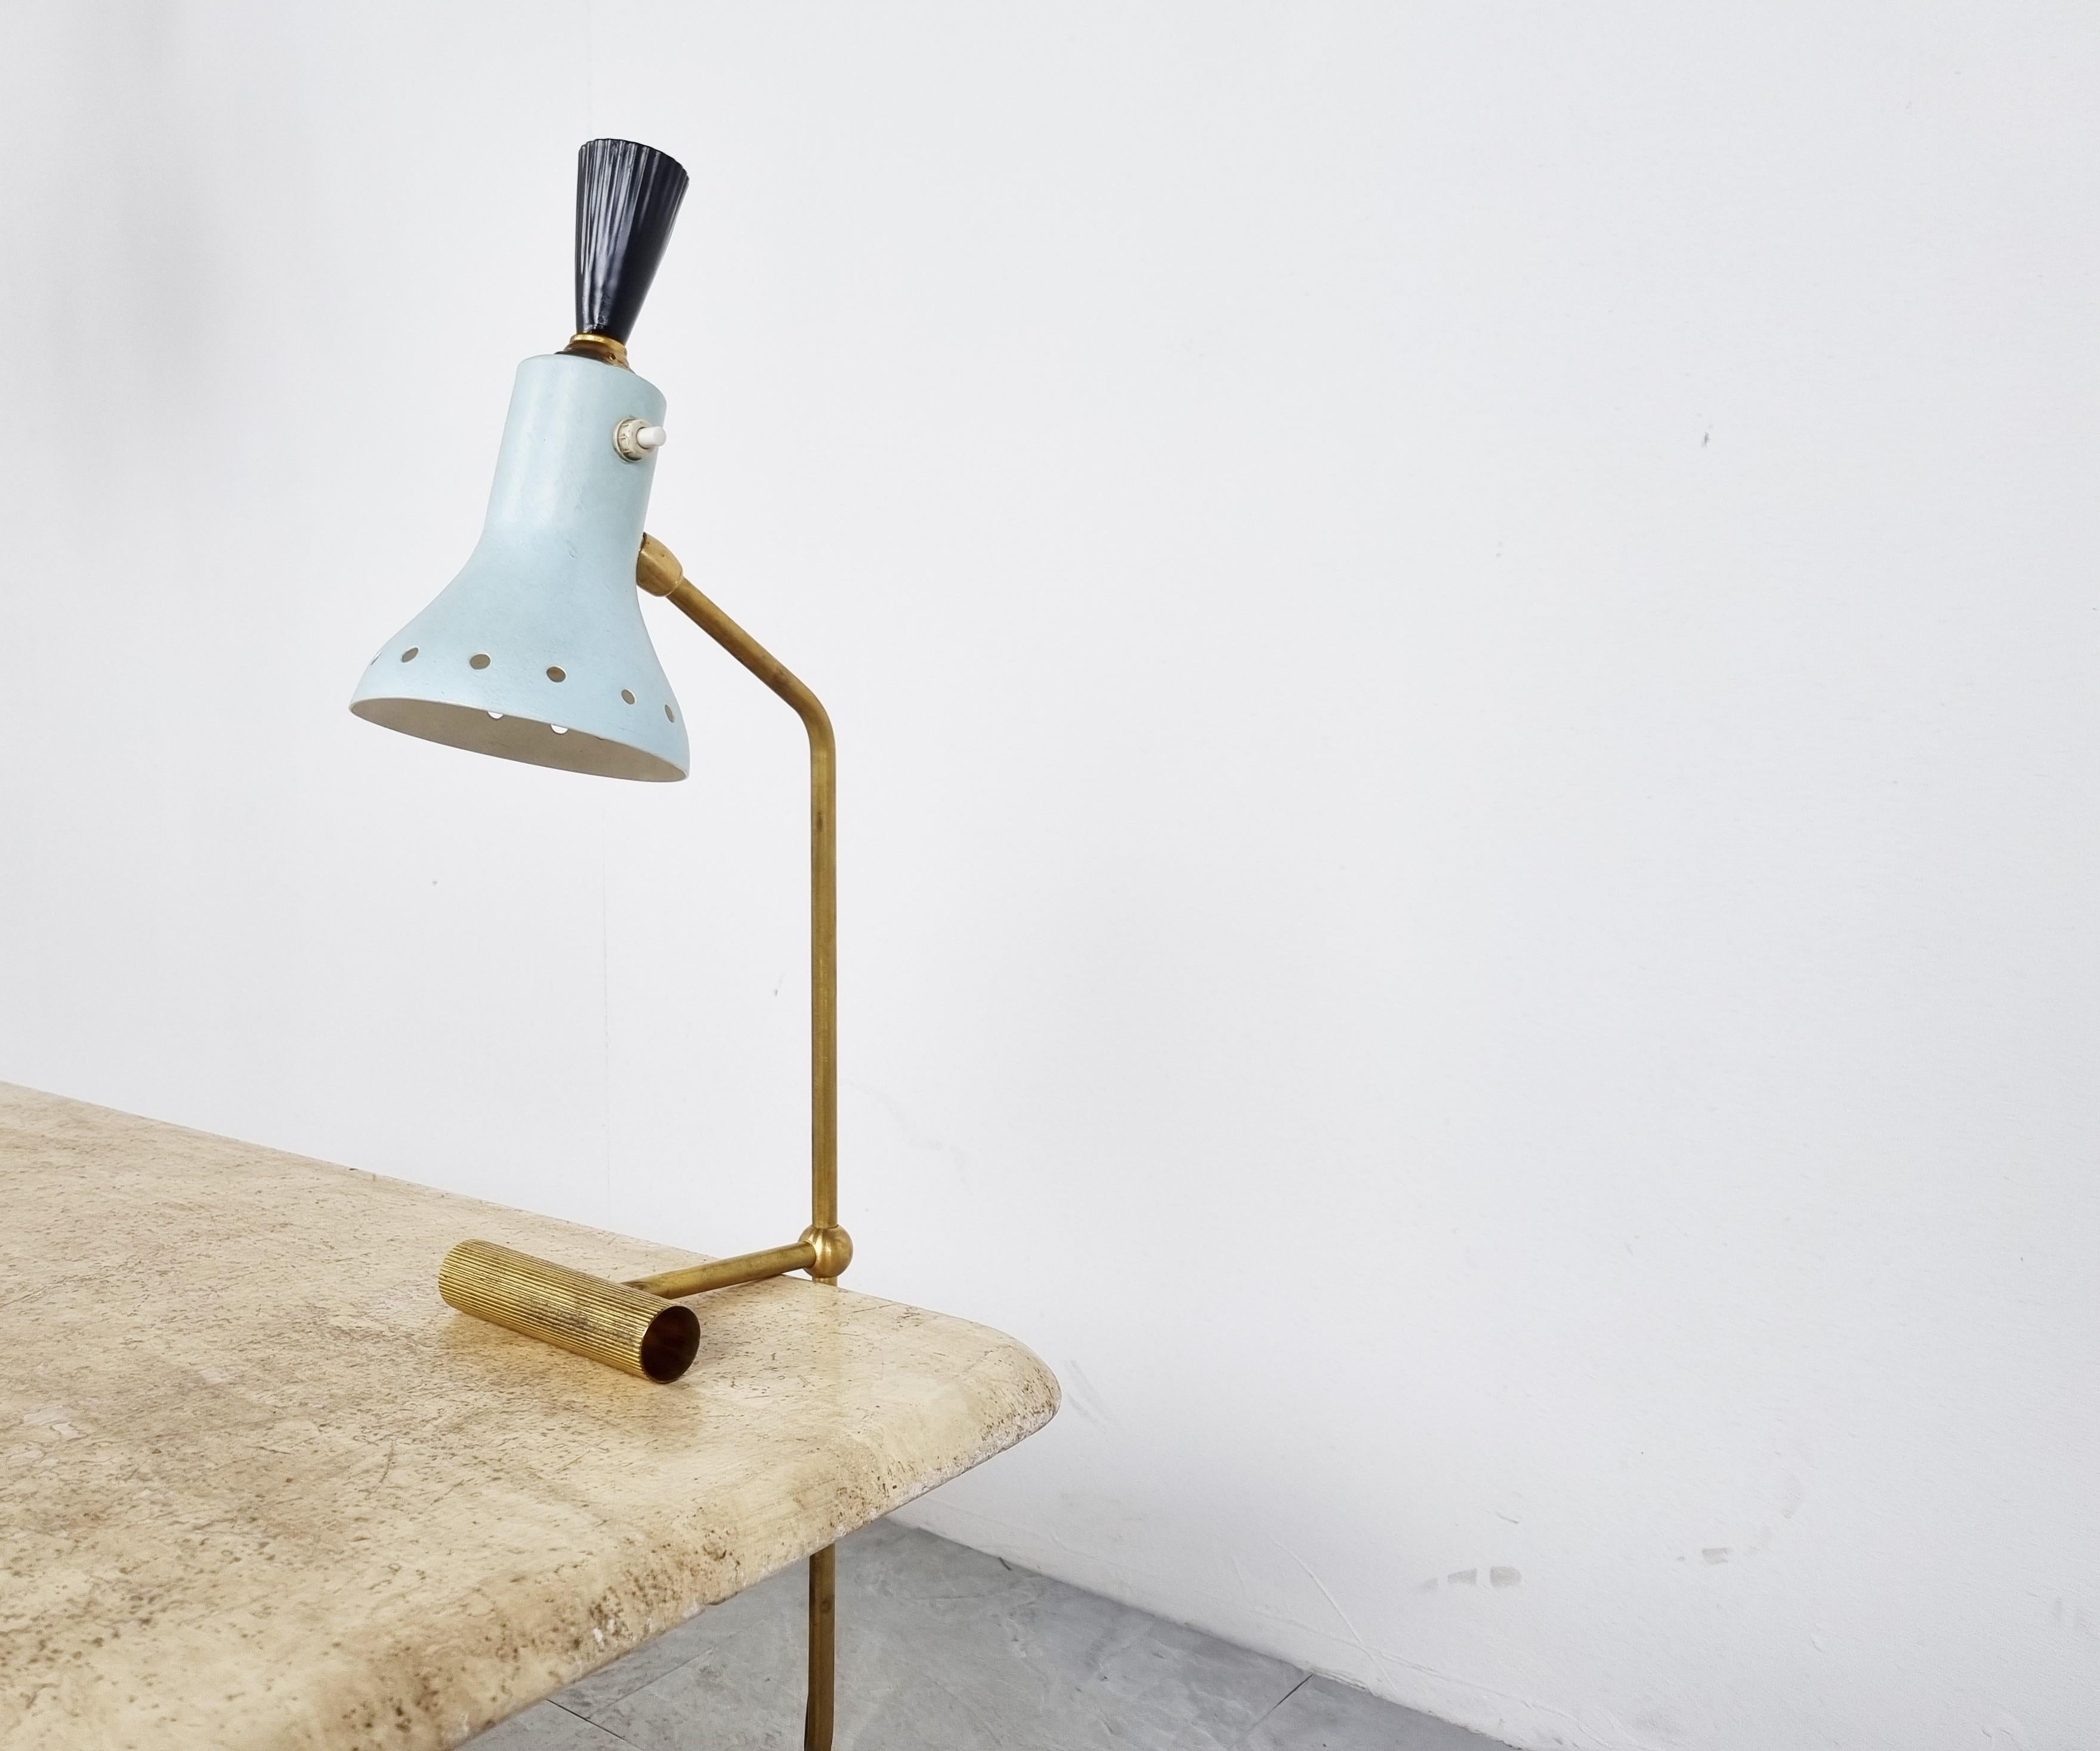 Unusual mid century counter balancing table lamp with a diabolo shaped lamp shade.

Beautiful light blue colour and patinated brass arm/base.

The smart design uses a brass counter wheight to keep the lamp stable.

The lamp shade is adjustable